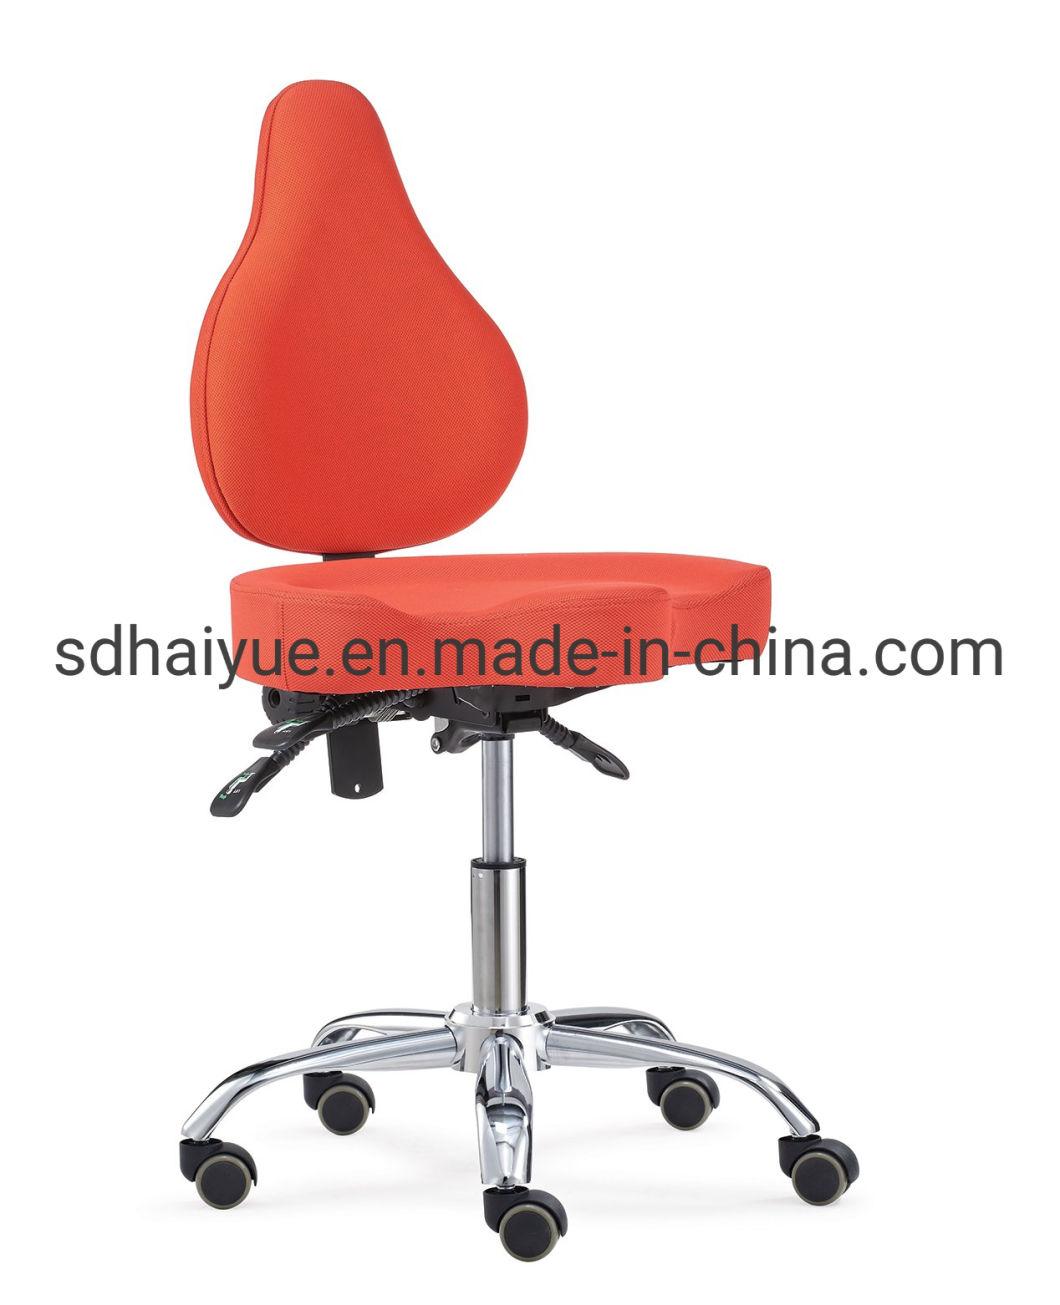 High Quality Adjustable Height Rolling Red Office Chair with Backrest